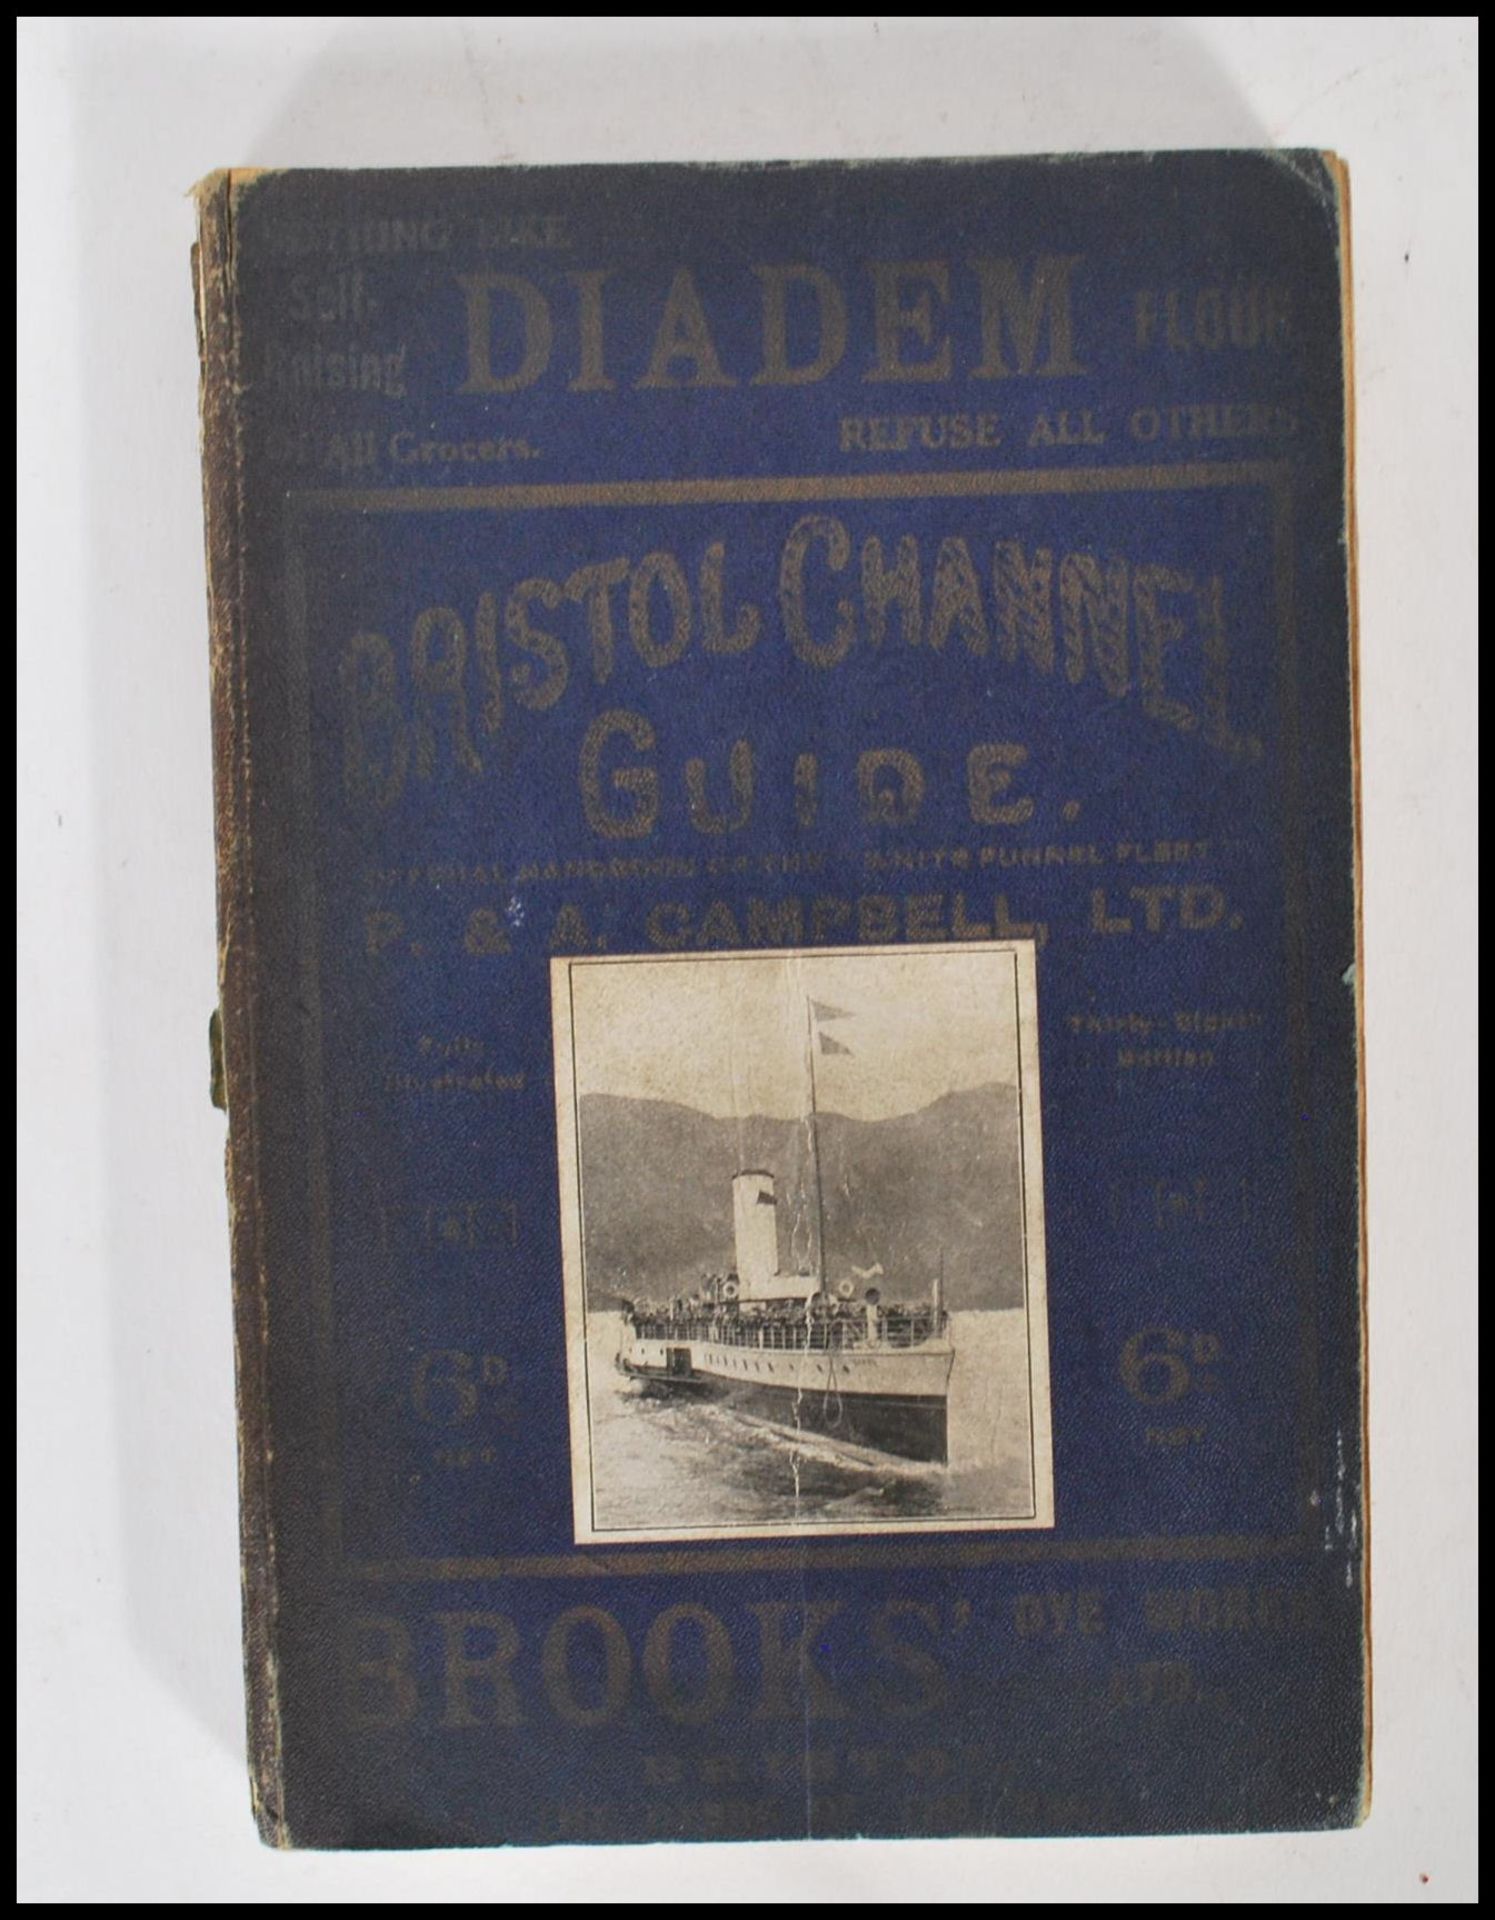 Book: BRISTOL CHANNEL GUIDE (Official Handbook to P&A Campbell White Funnel Fleet Marine